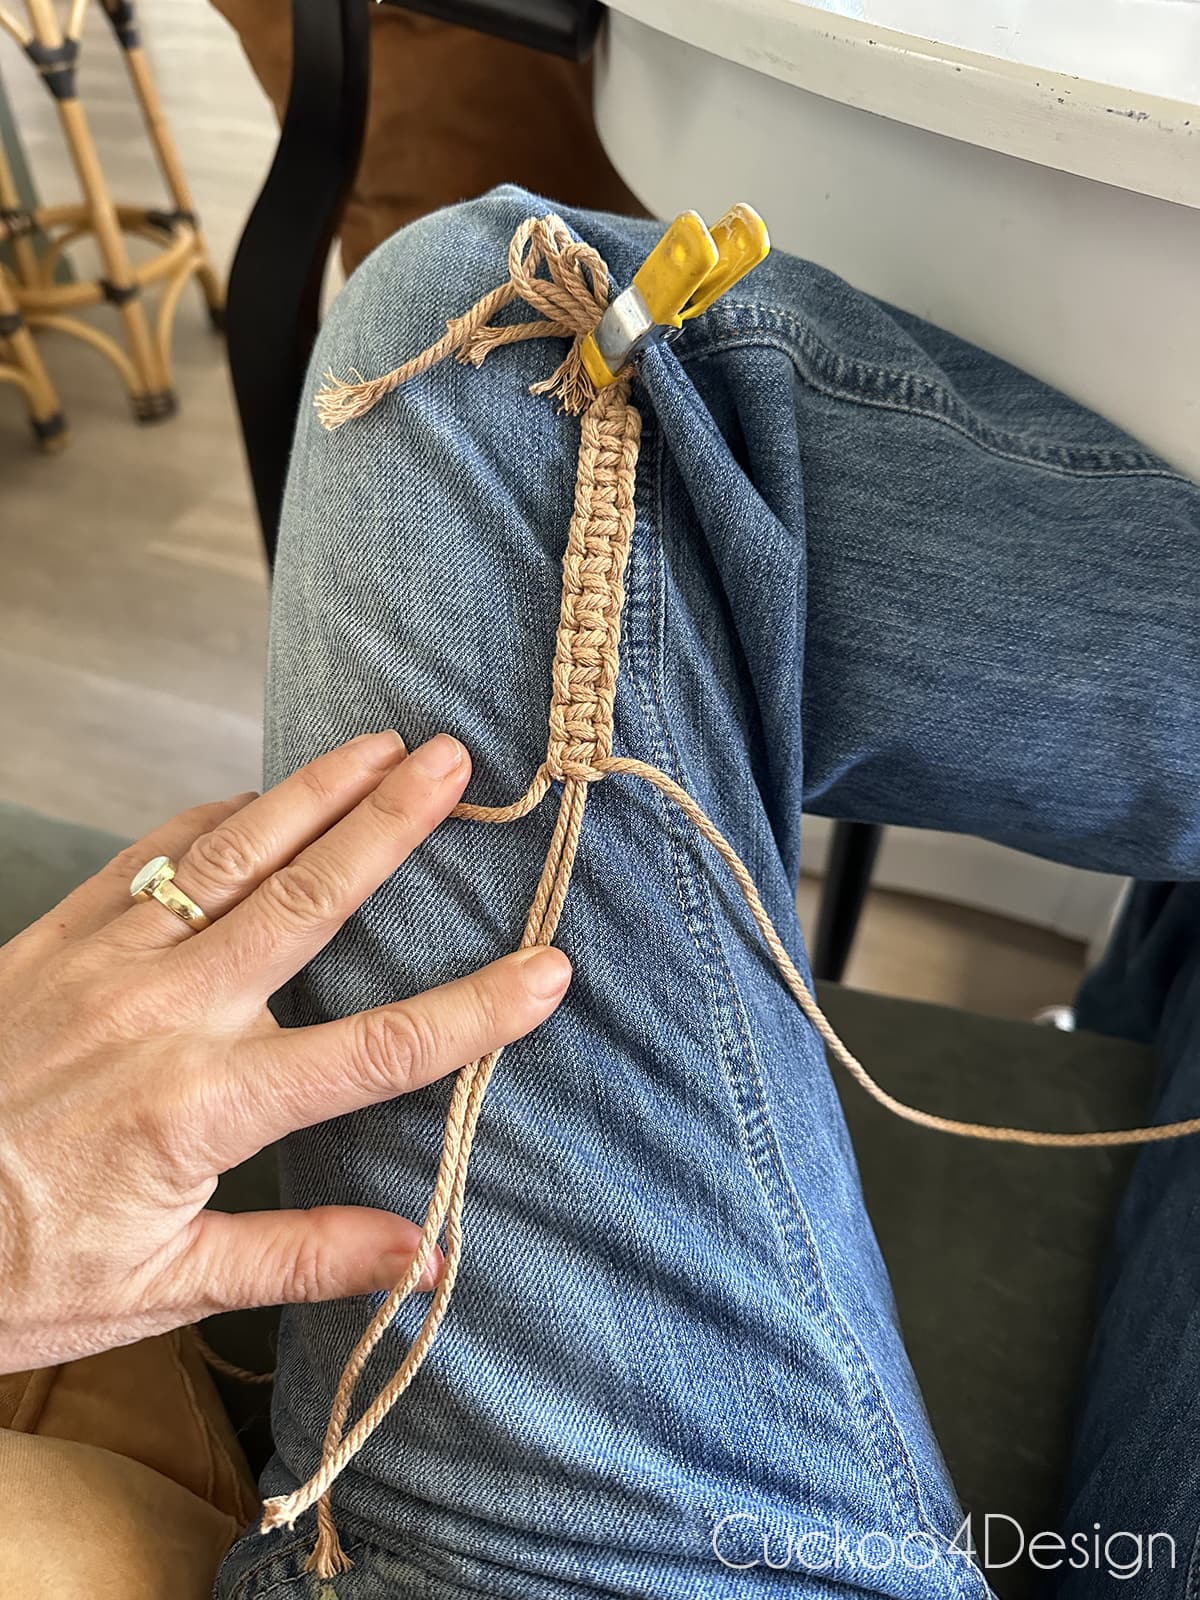 clipping yarn to pants to knot Square Knot strands